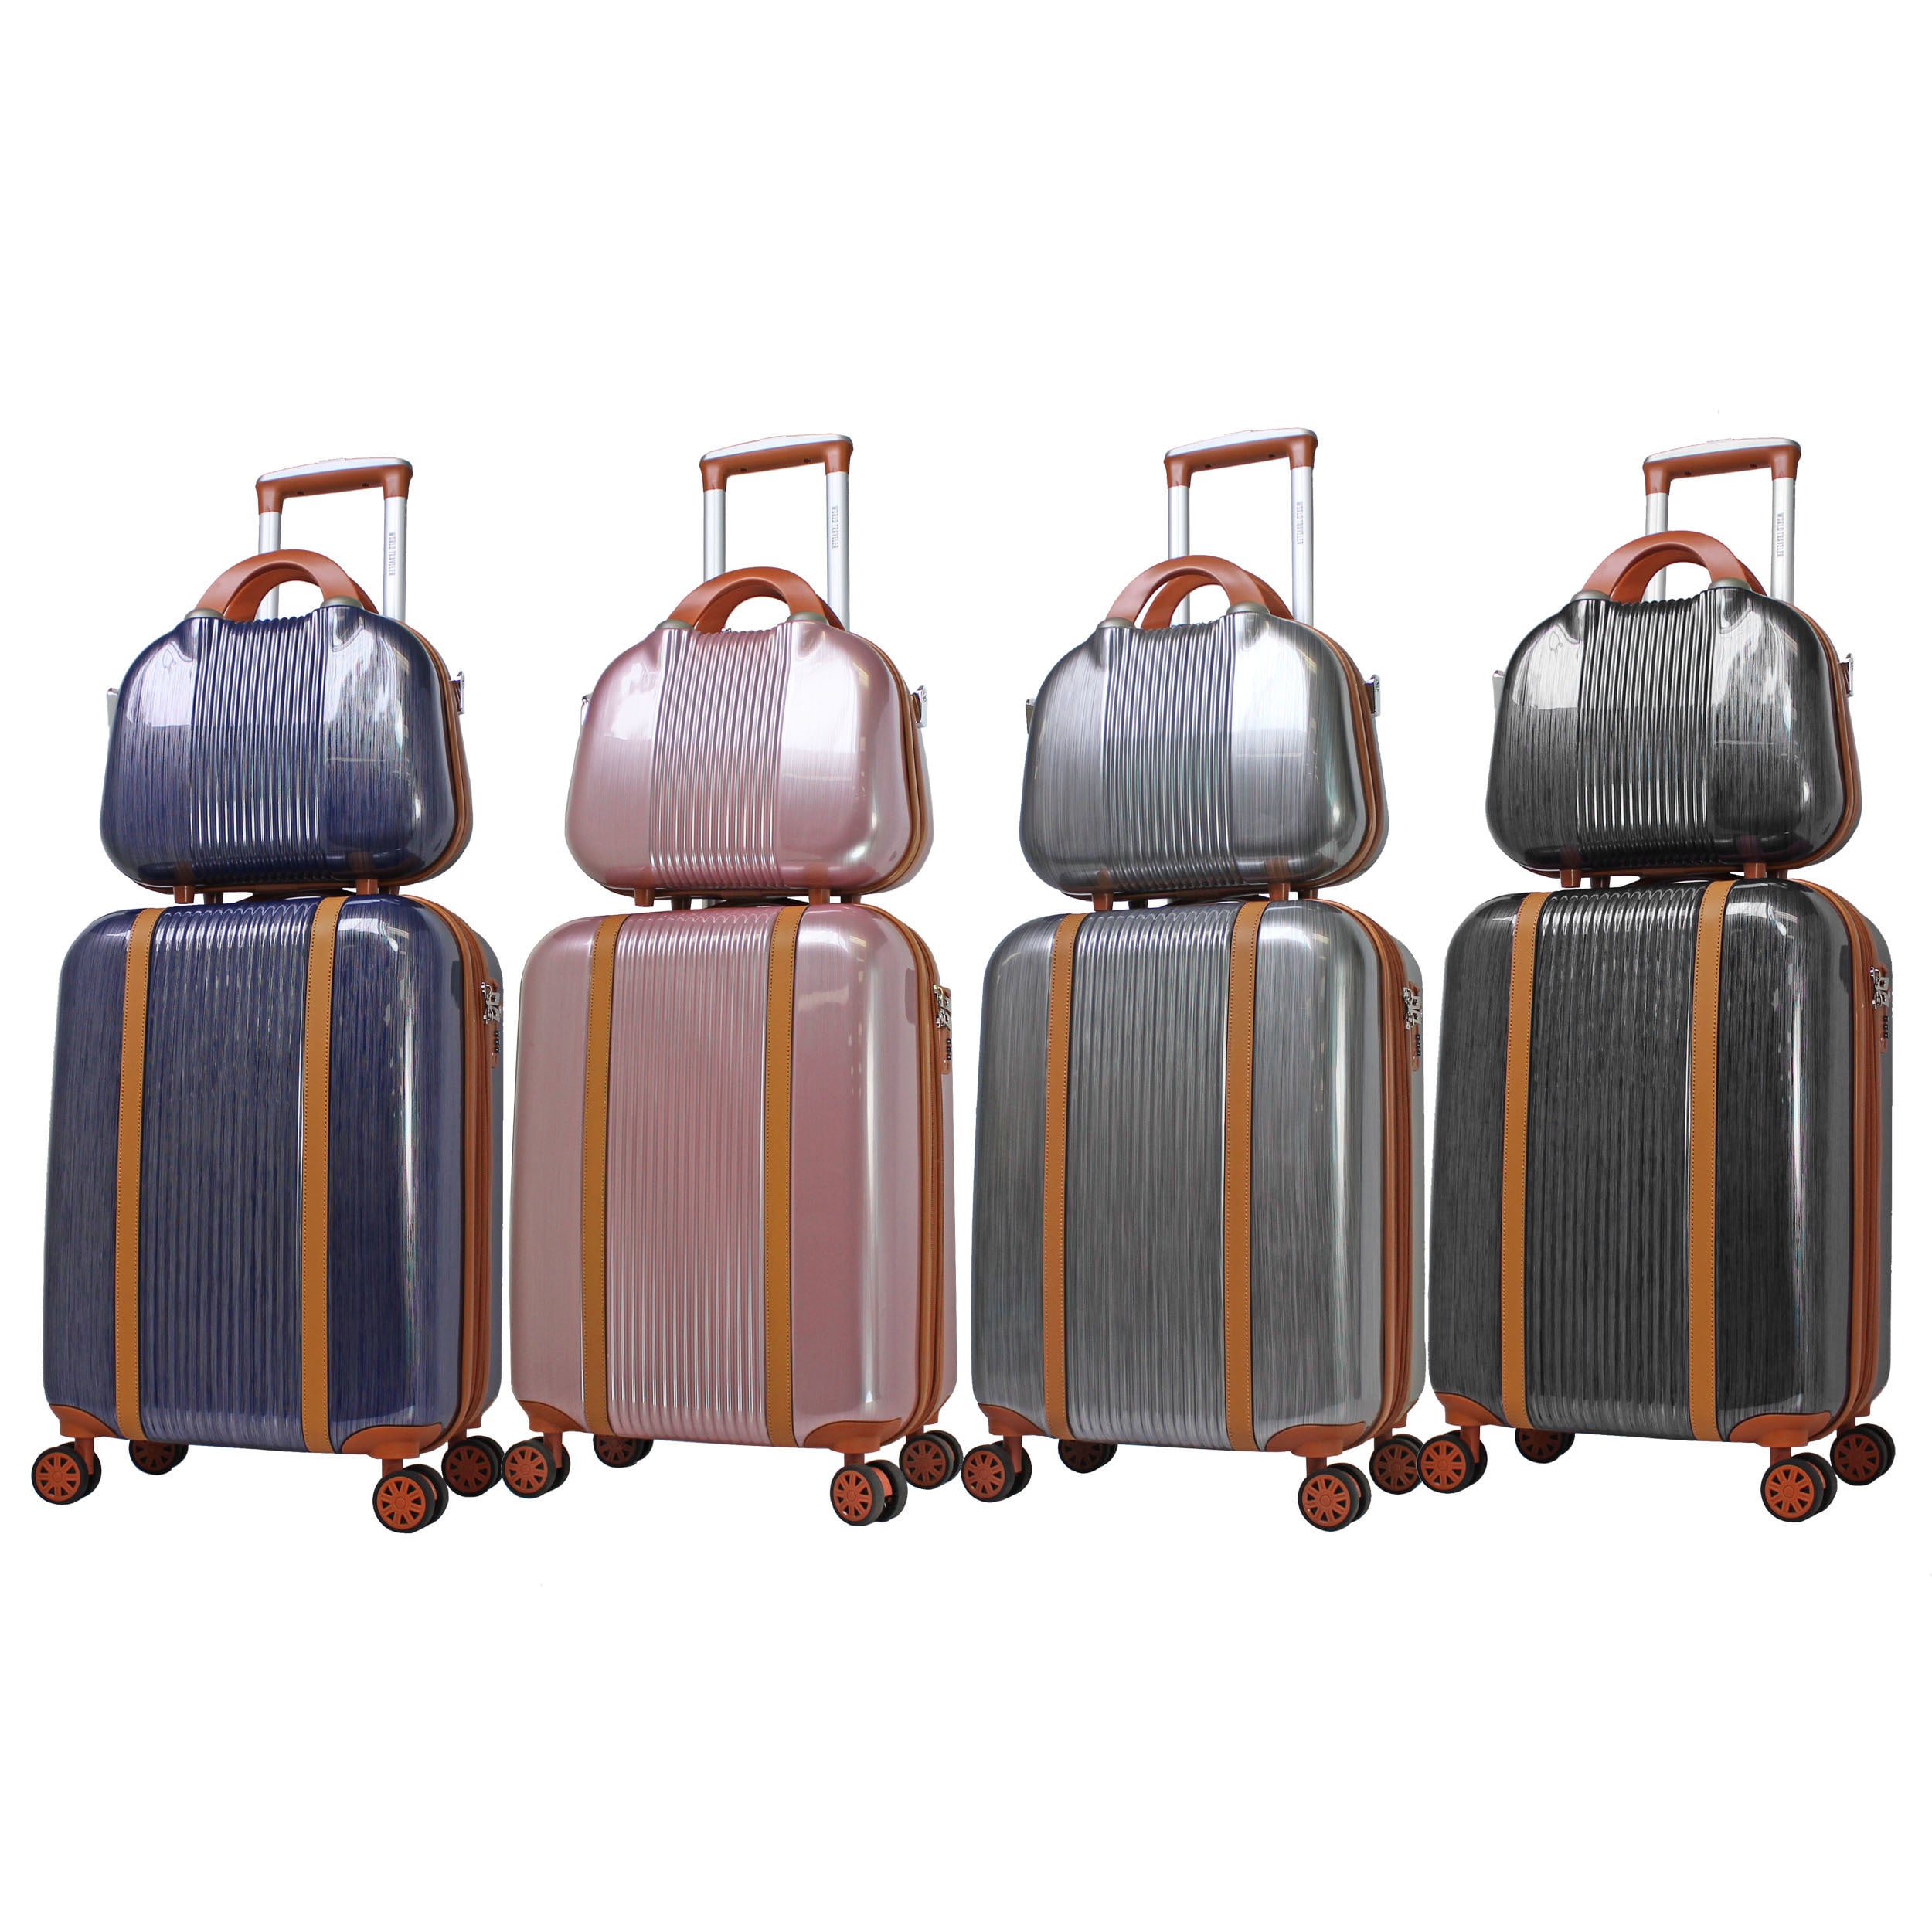 carry on luggage set,Save up to